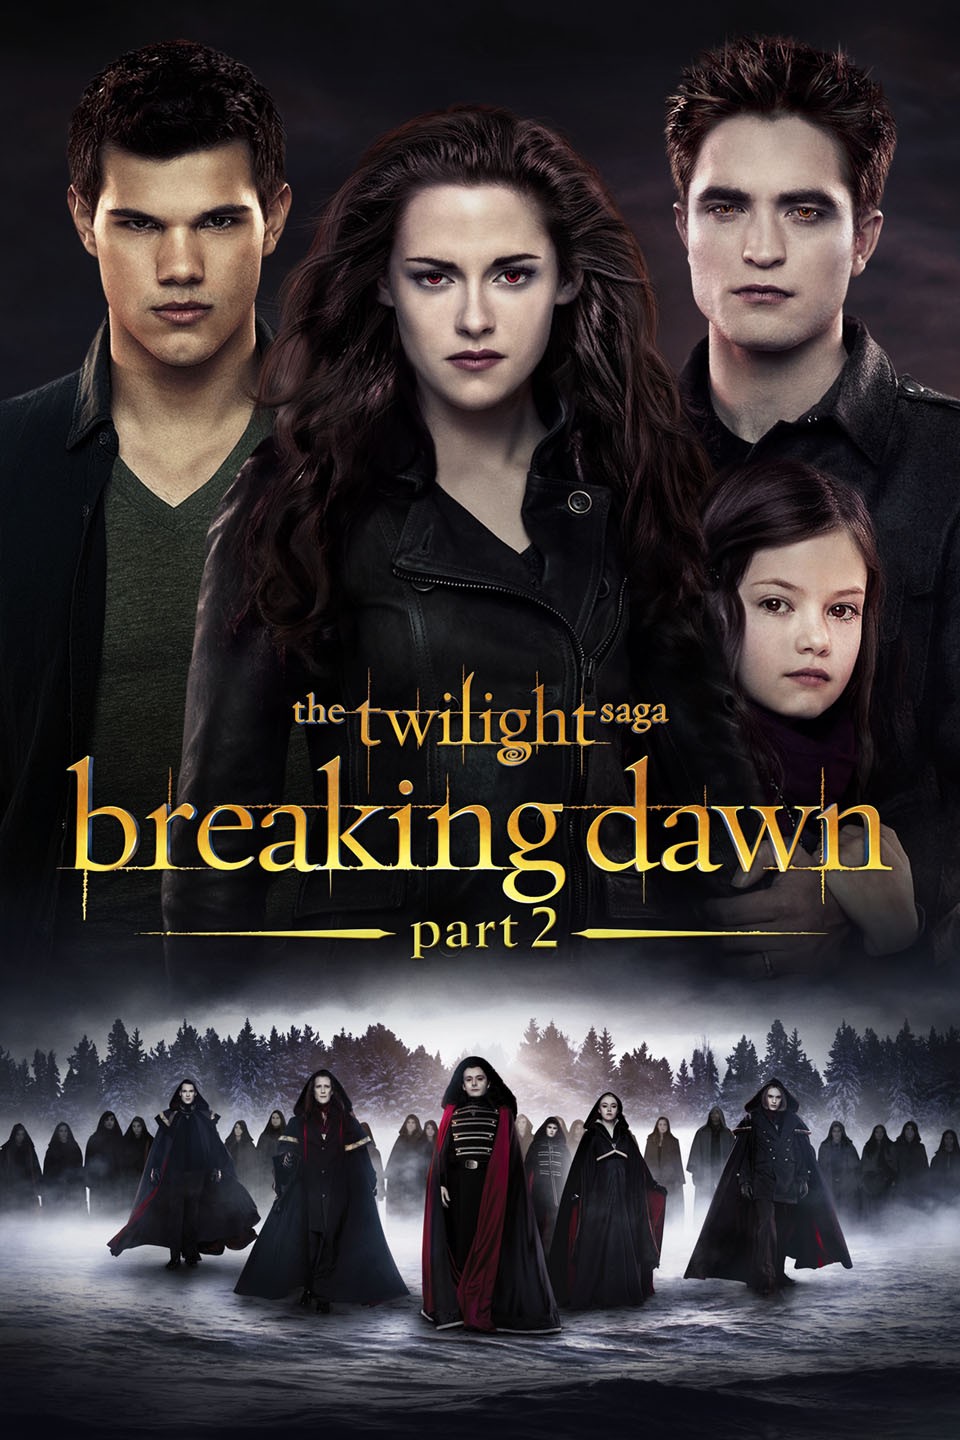 breaking dawn book cover drawing